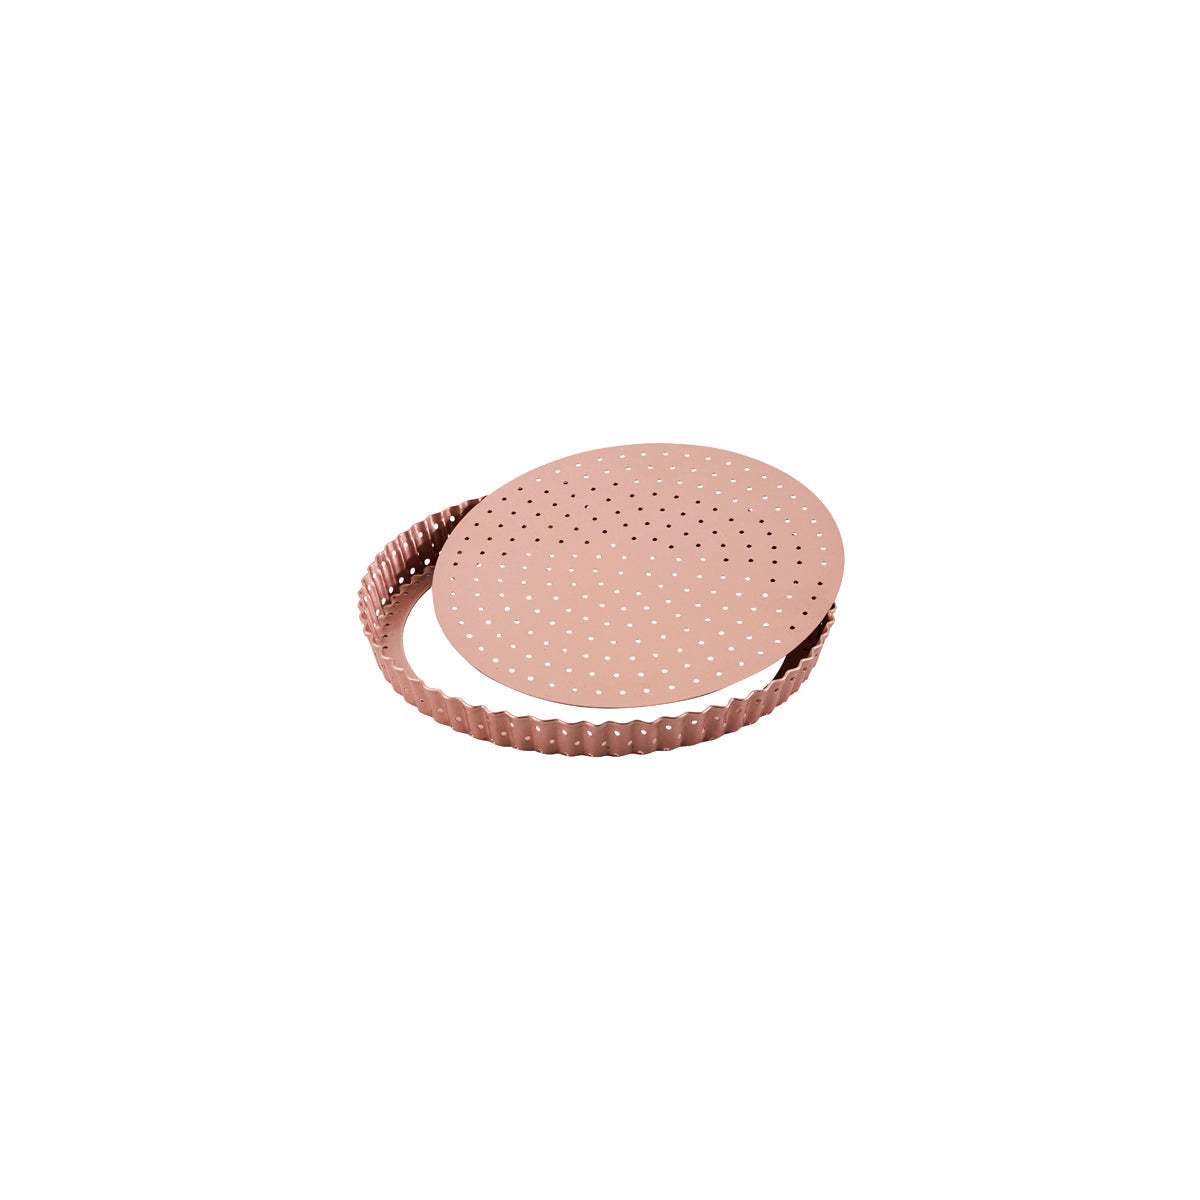 WLT40720 Wiltshire Rose Gold Perforated Quiche 240mm Tomkin Australia Hospitality Supplies